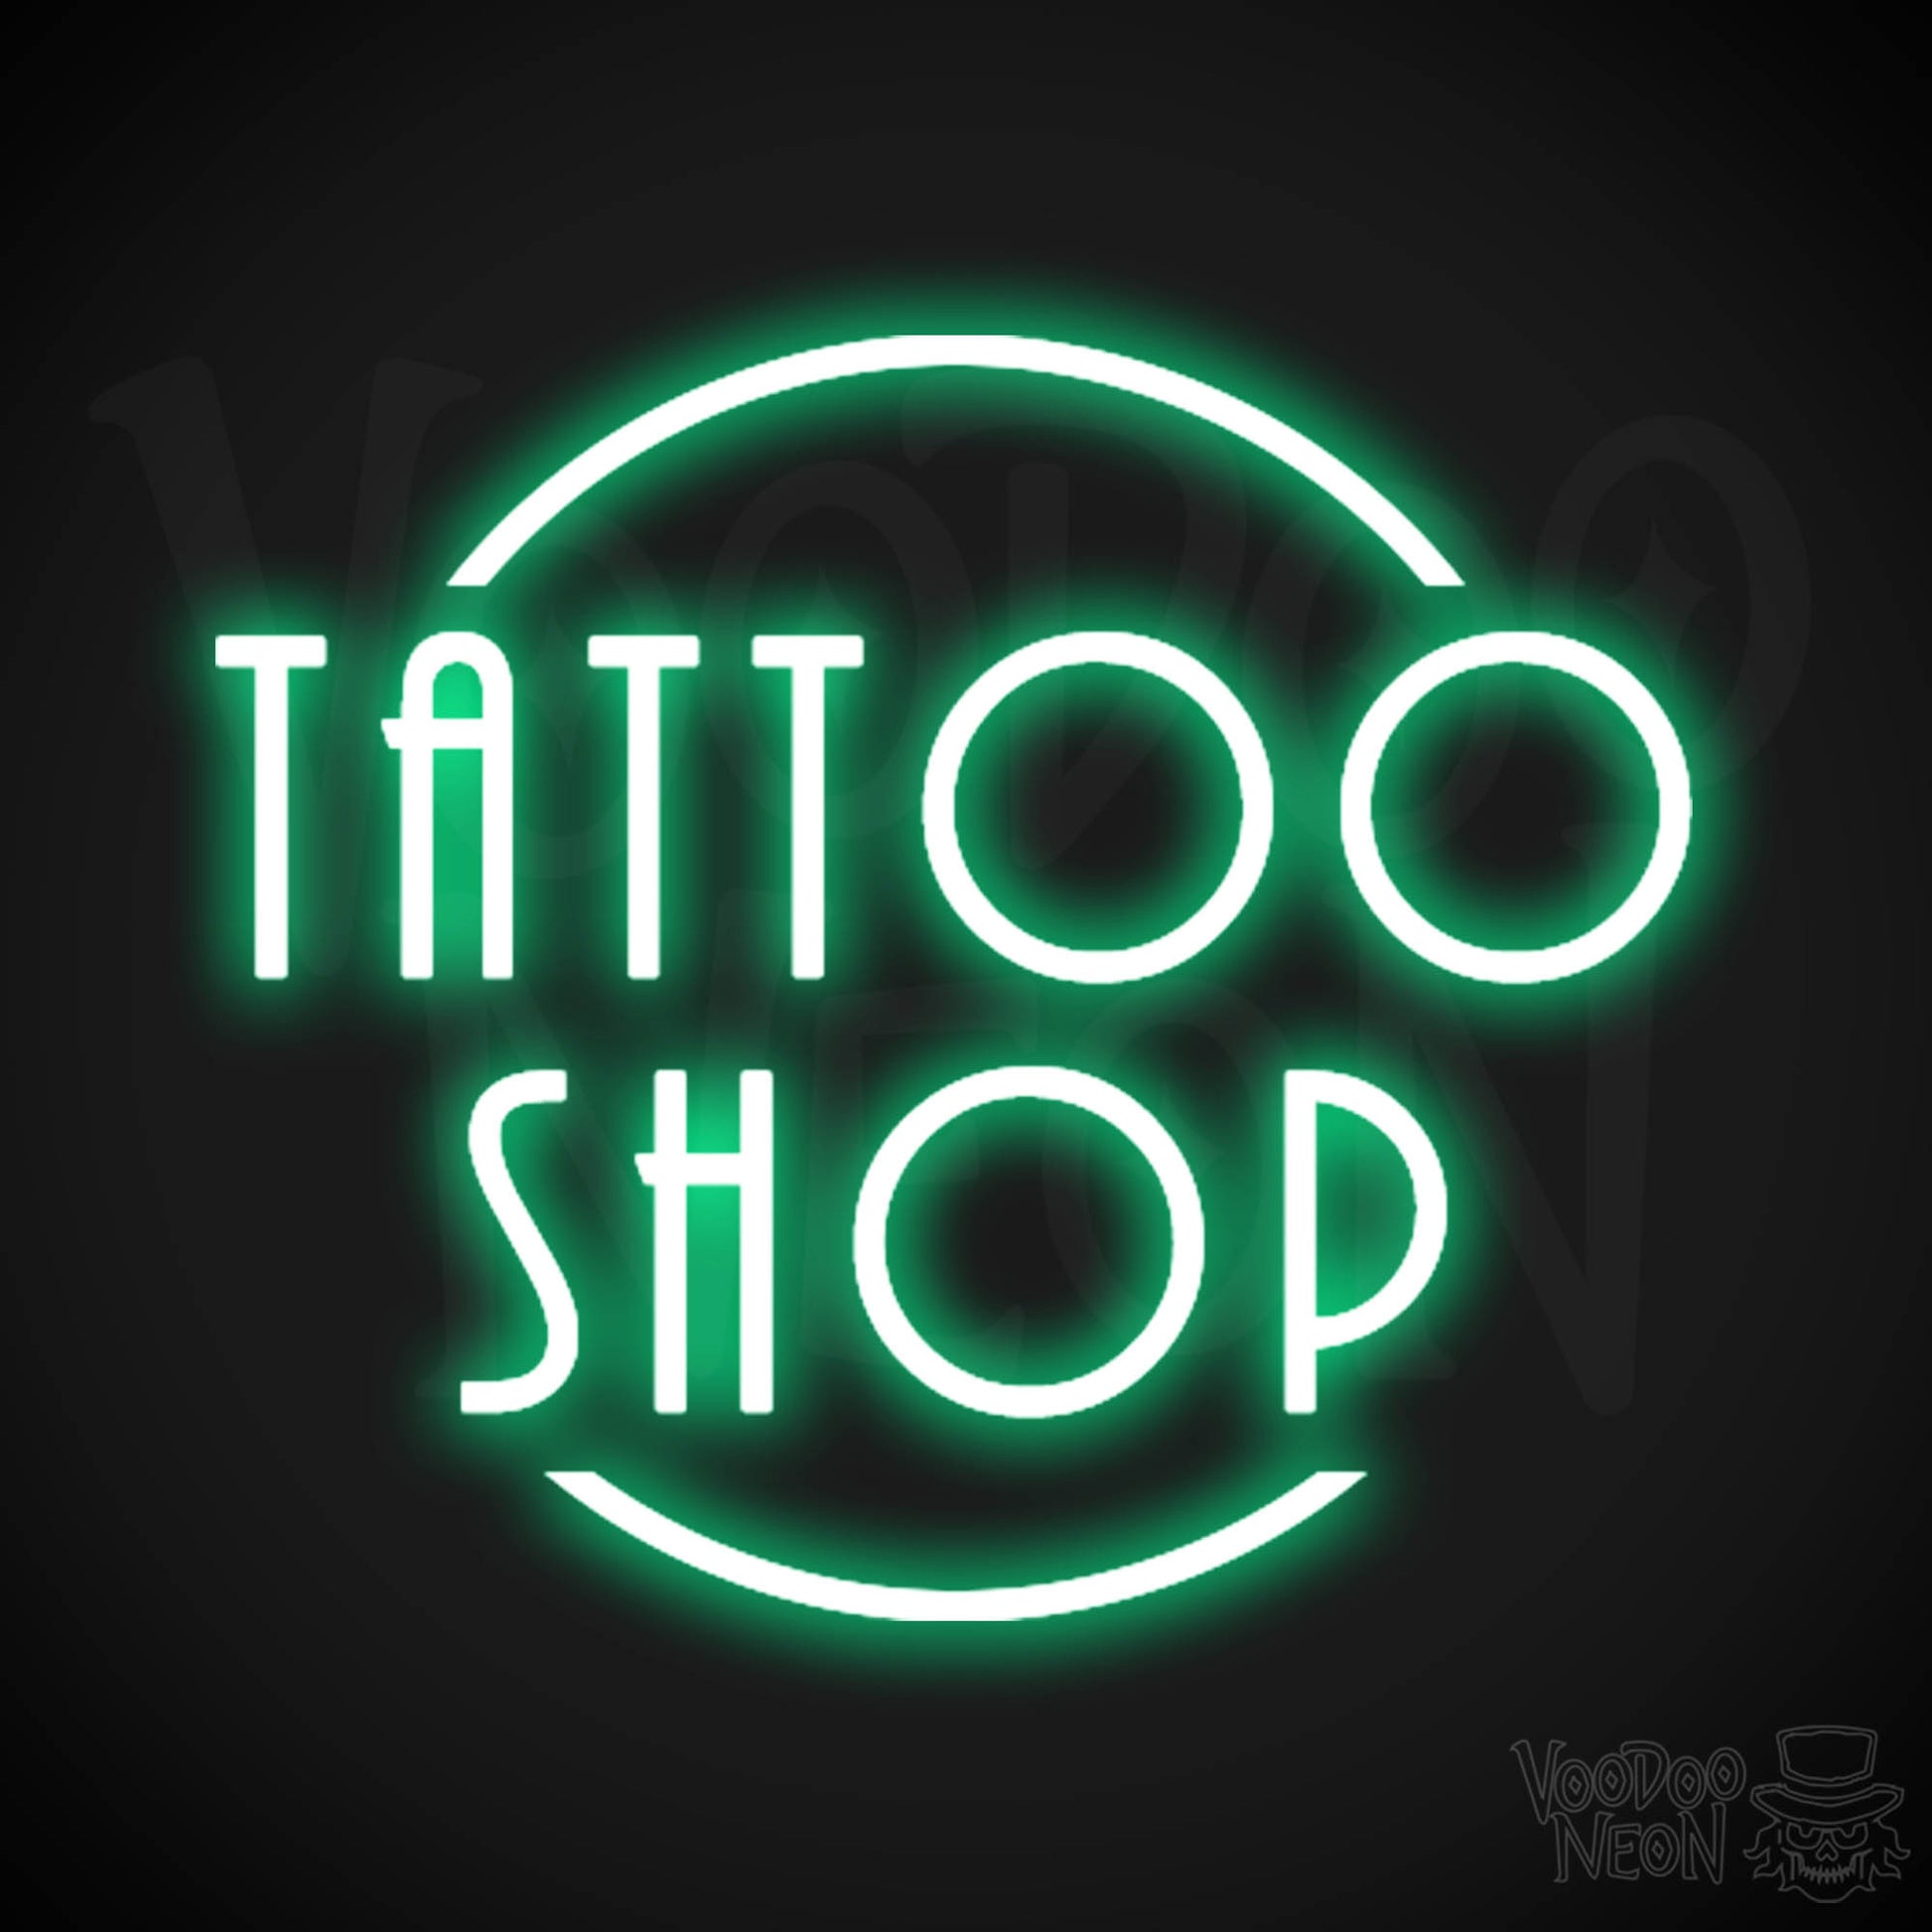 Tattoo Shop Neon Sign - Neon Tattoo Shop Sign - Tattoo Sign - Color Green